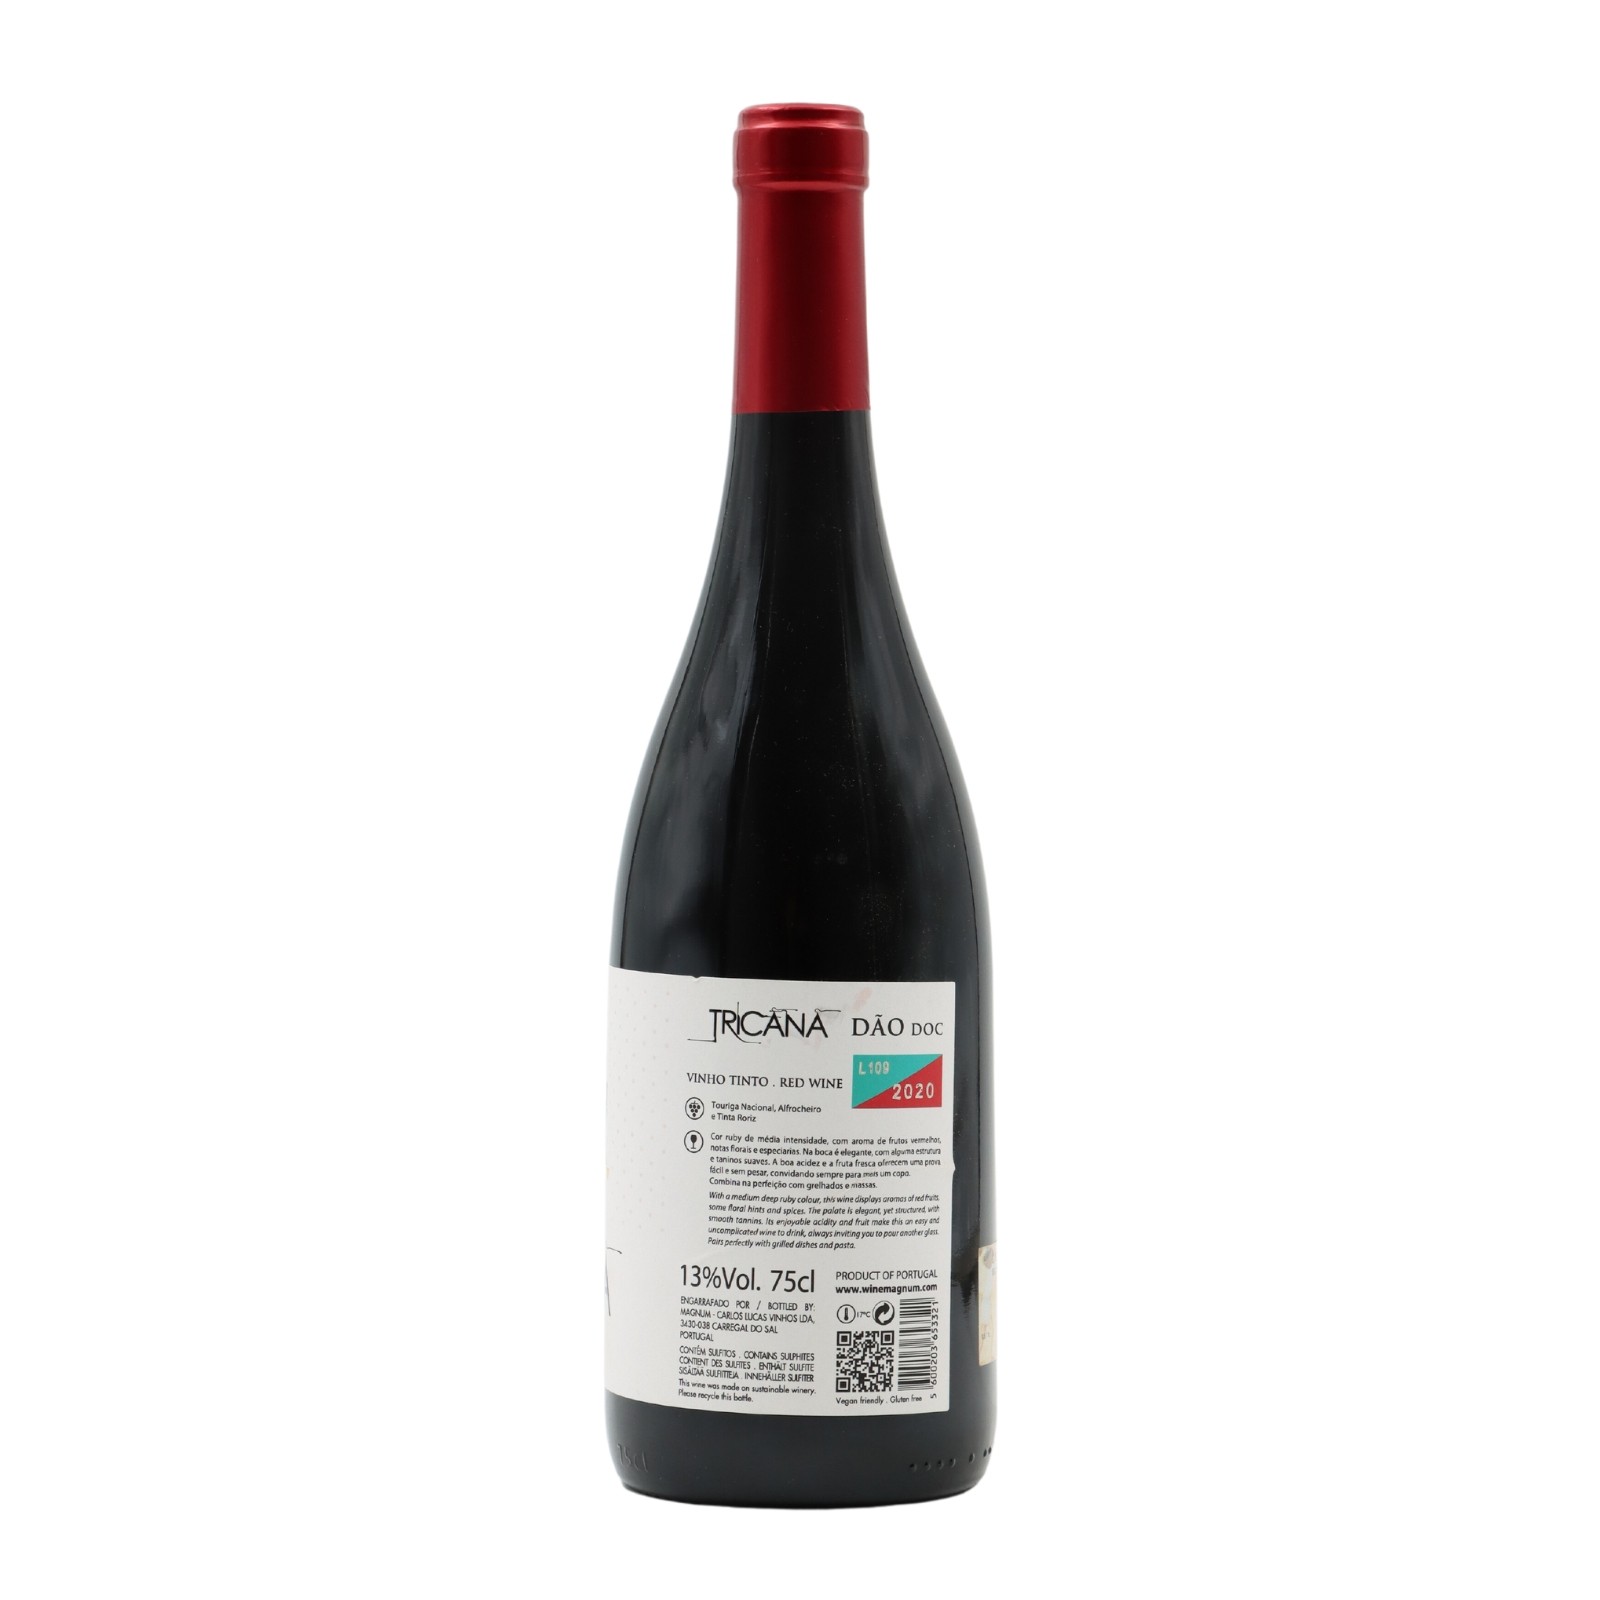 Tricana Unoaked Red 2019